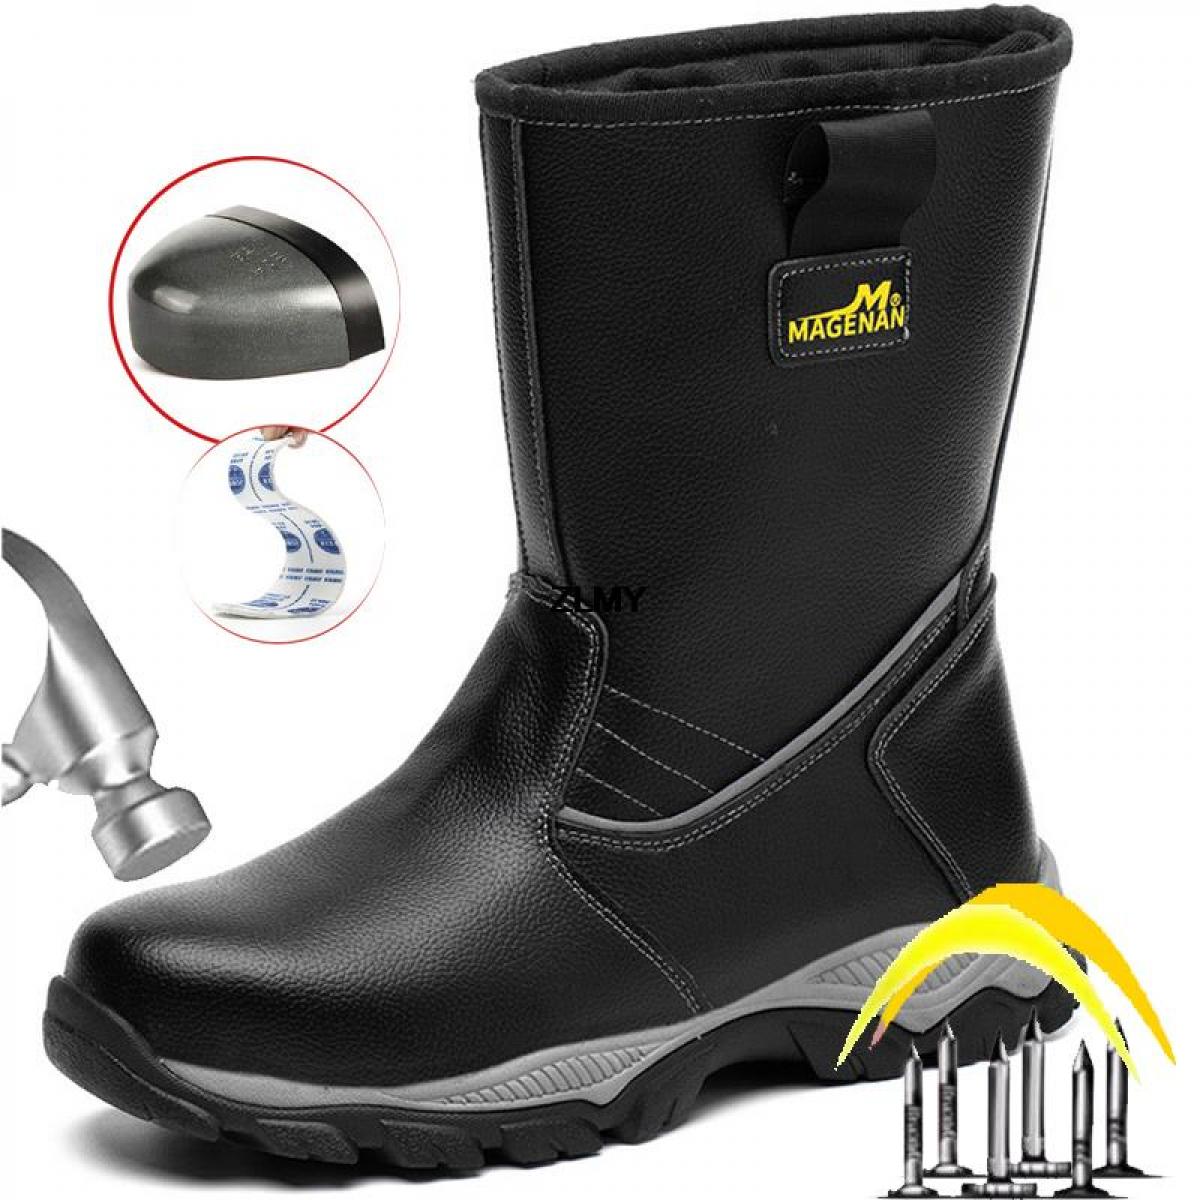 Oil Proof Safety Shoes For Men High Top Work Shoes Steel Toe Antistab Antismash Work Safety Boots Man Welder Shoes Antis